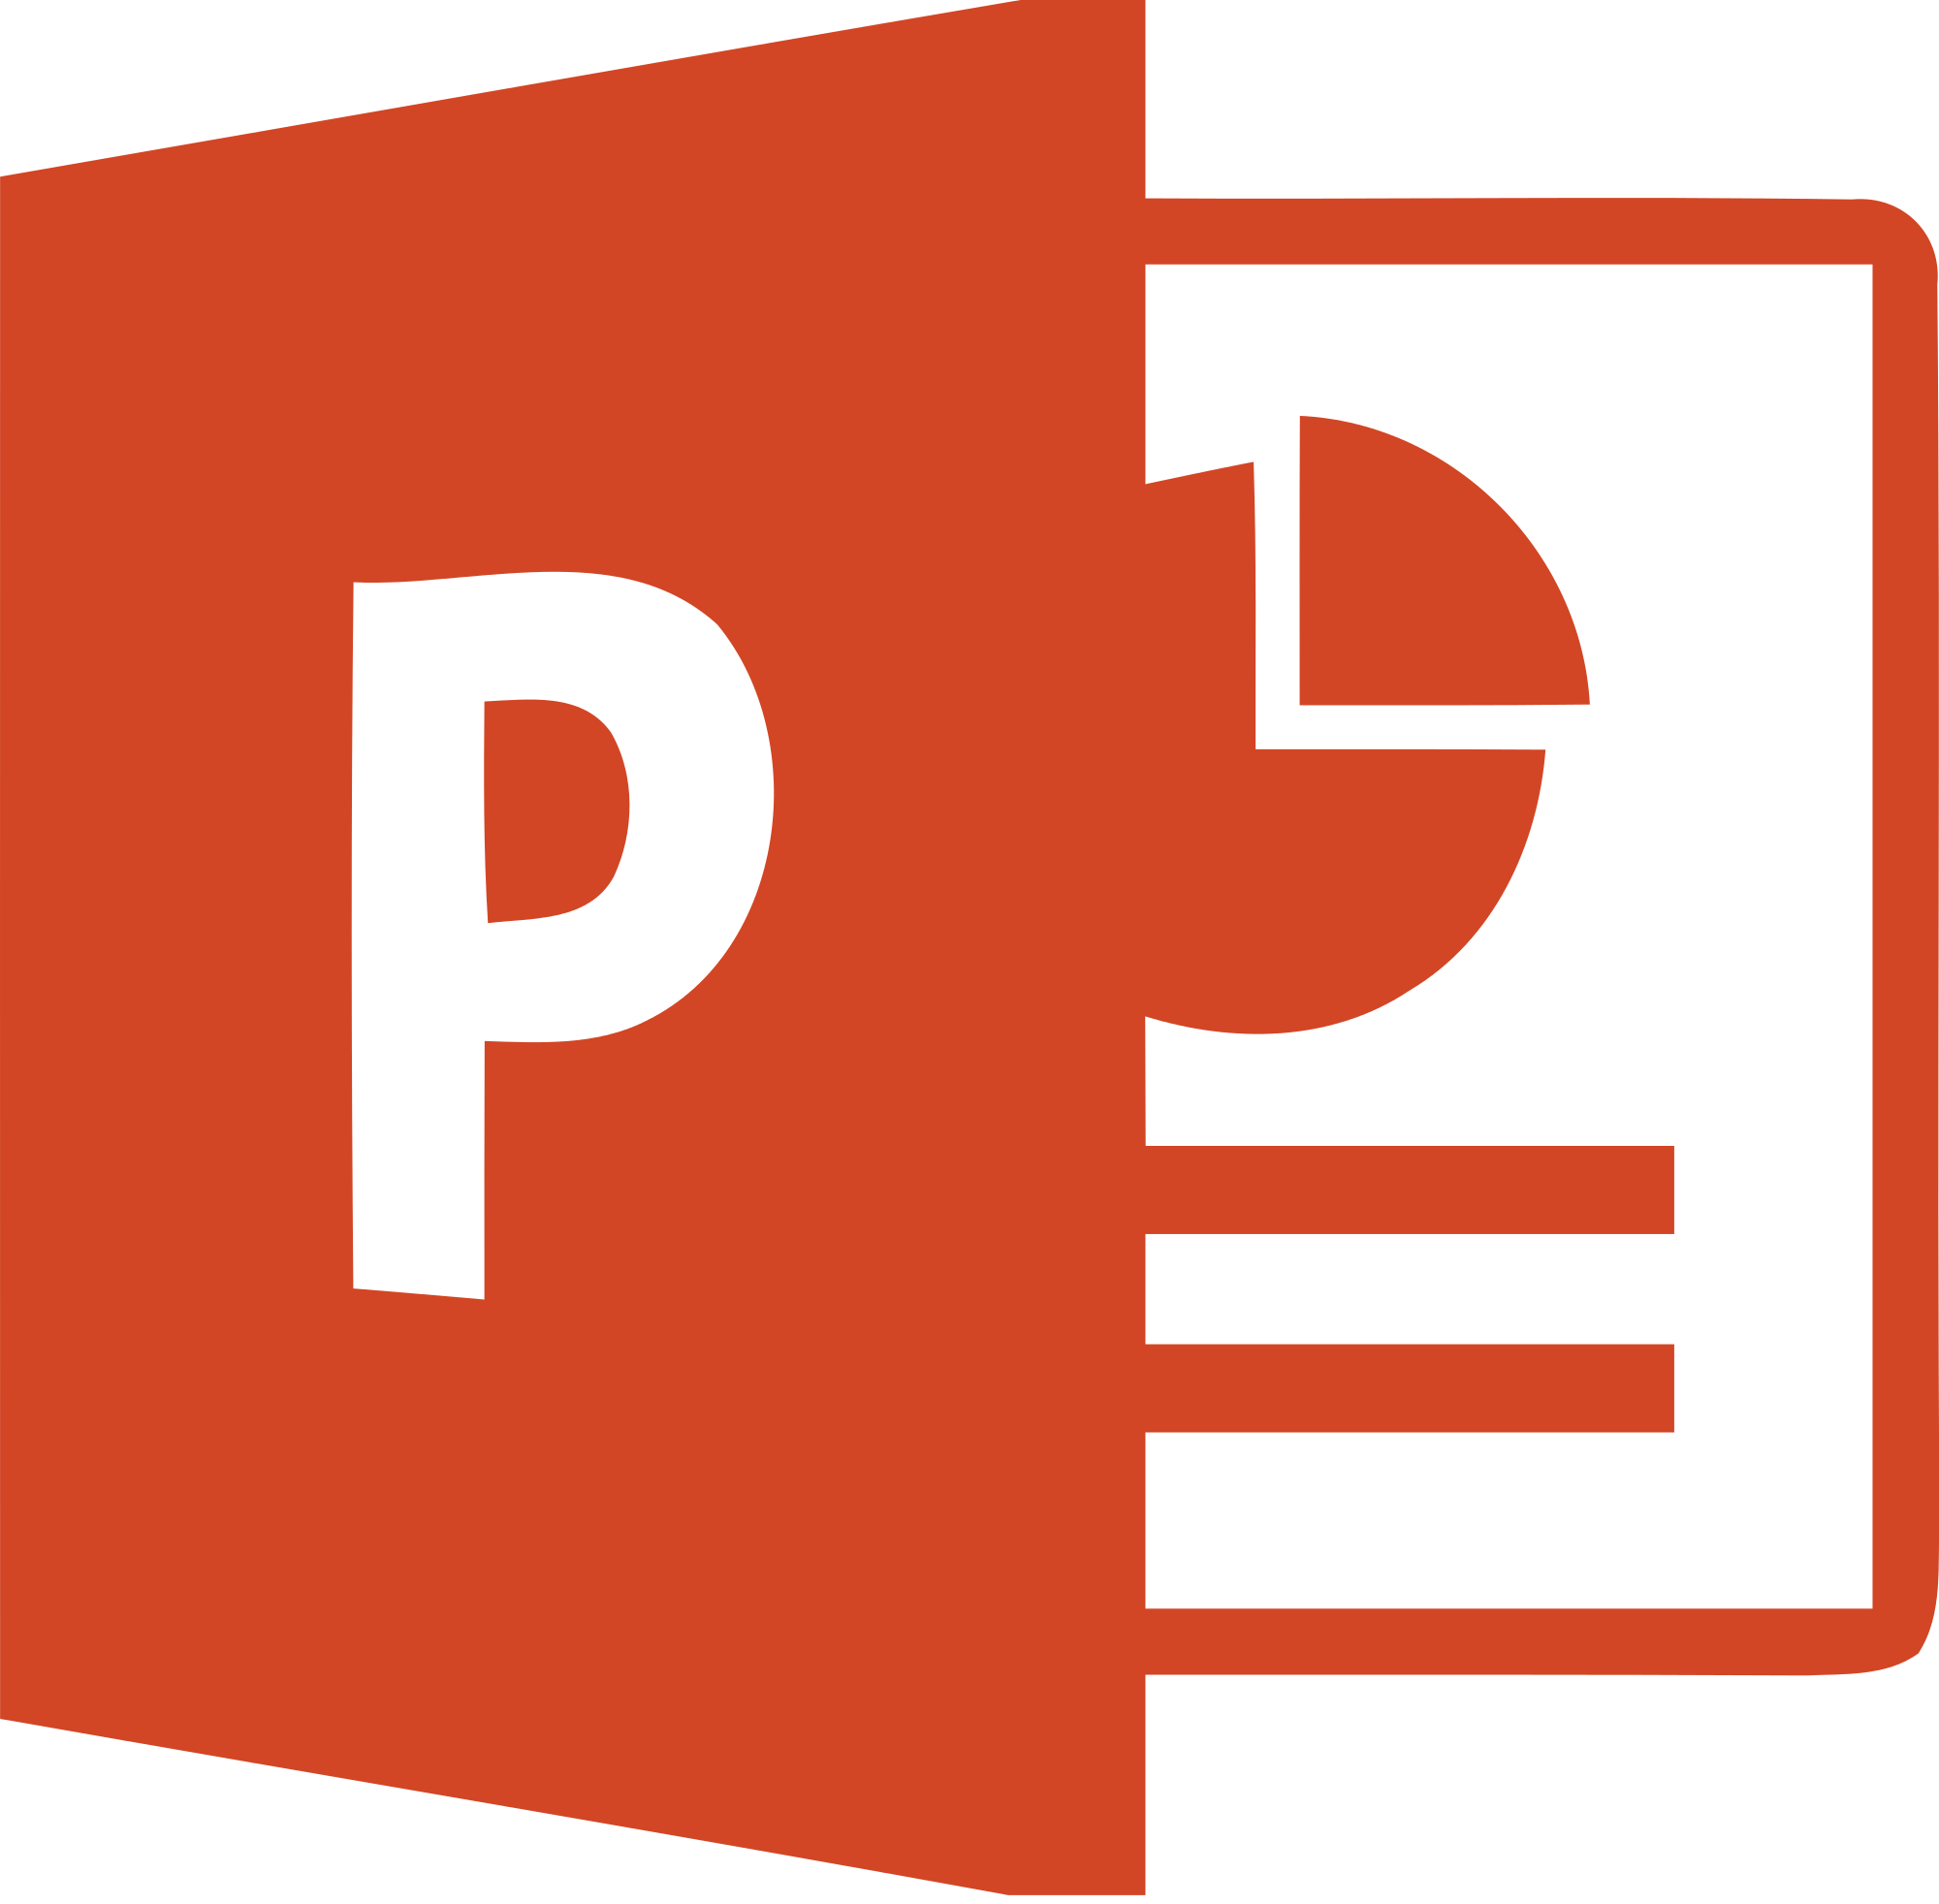 Microsoft_PowerPoint_2013_logo.svg.png